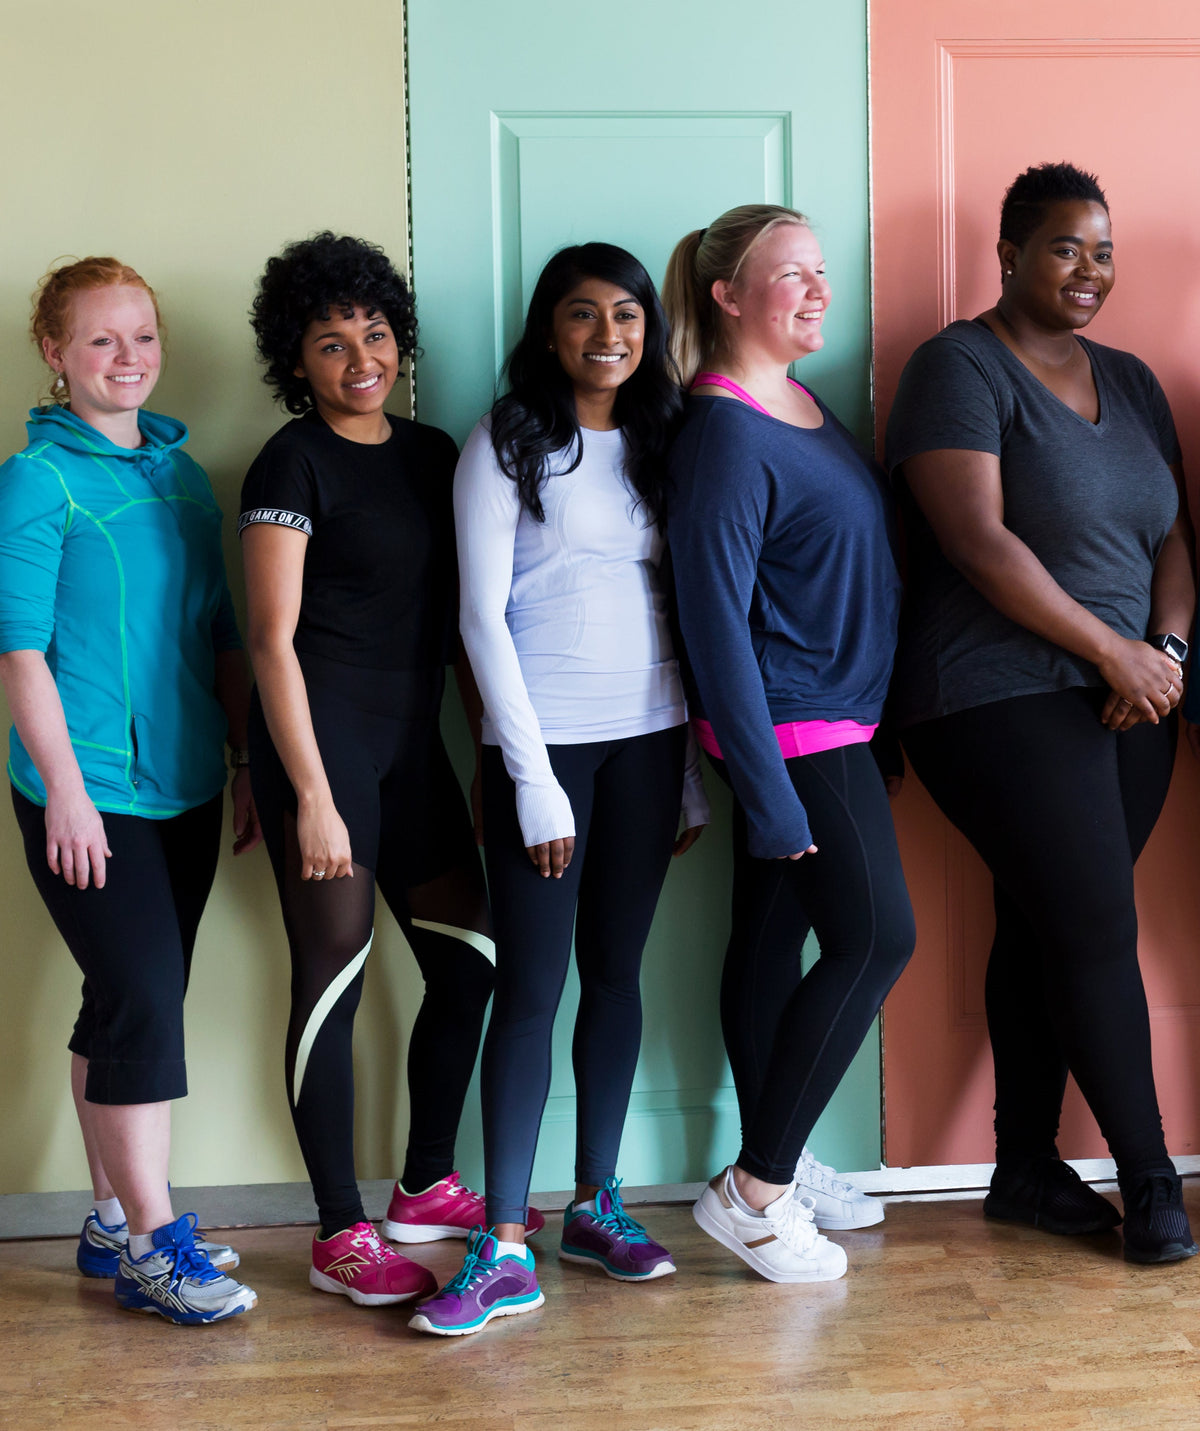 A group of women in fitness clothing all looking happy and cheerful